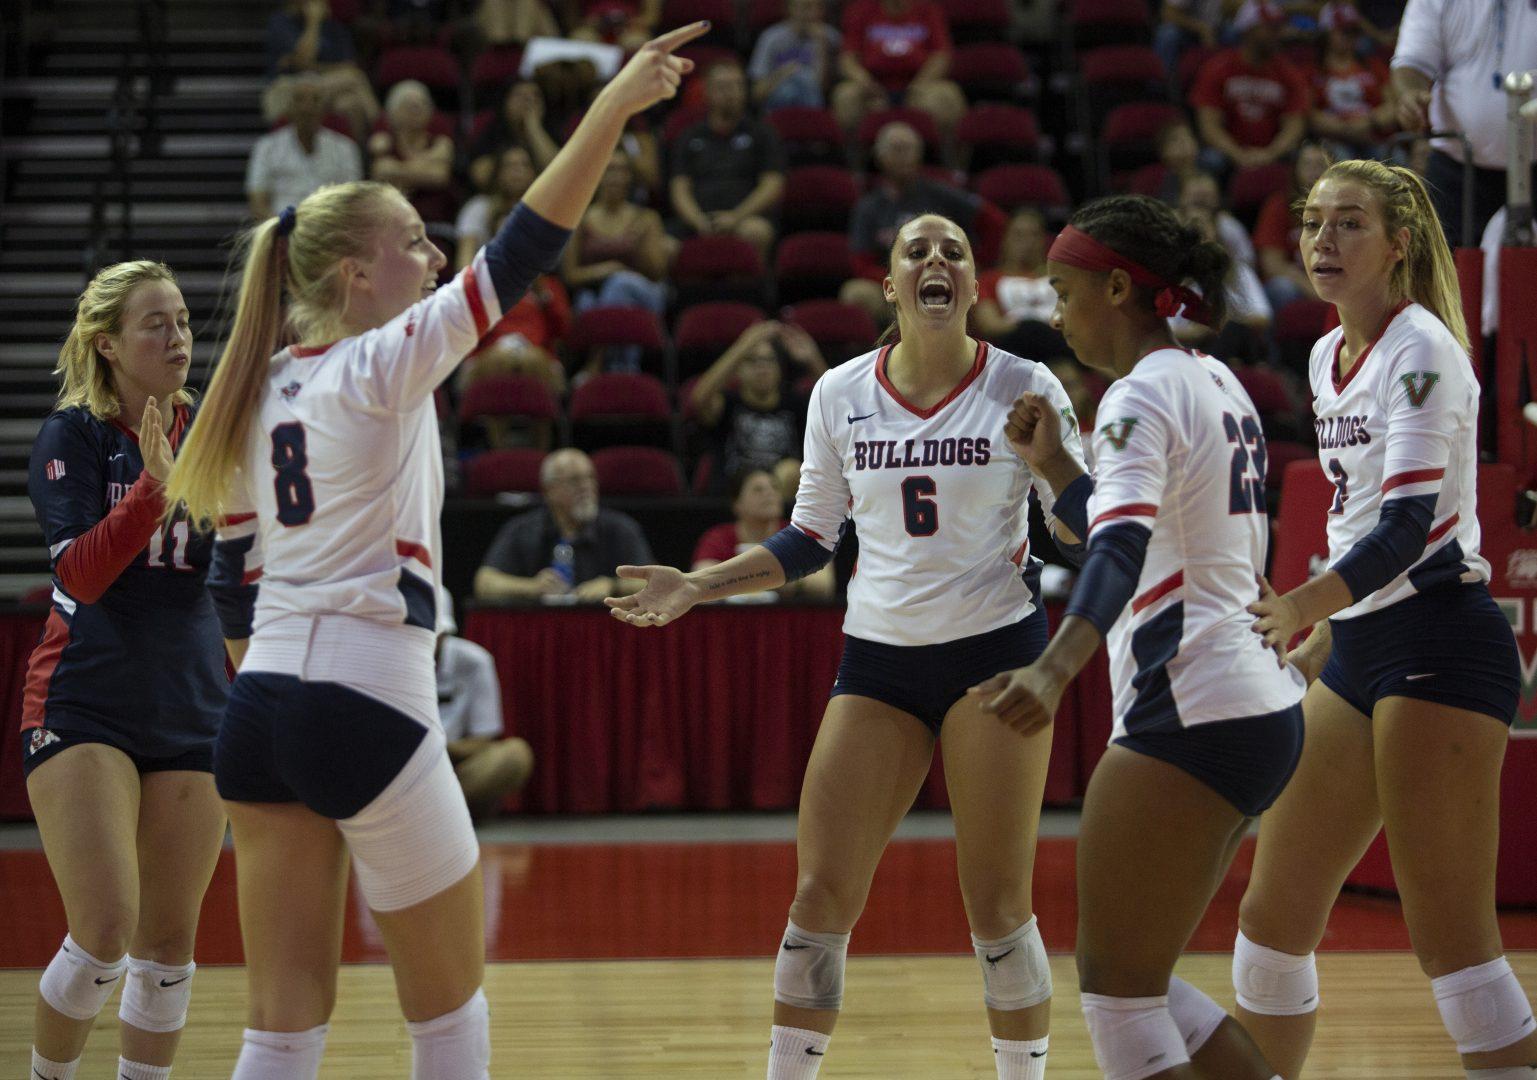 Volleyball+team+celebrates+a+point+made+by+Amilya+Thompson+against+the+Nevada+Wolf+Pack+at+The+Save+Mart+Center+on+Thursday%2C+Sept.+26%2C+2019.+%28Larry+Valenzuela%2F+The+Collegian%29